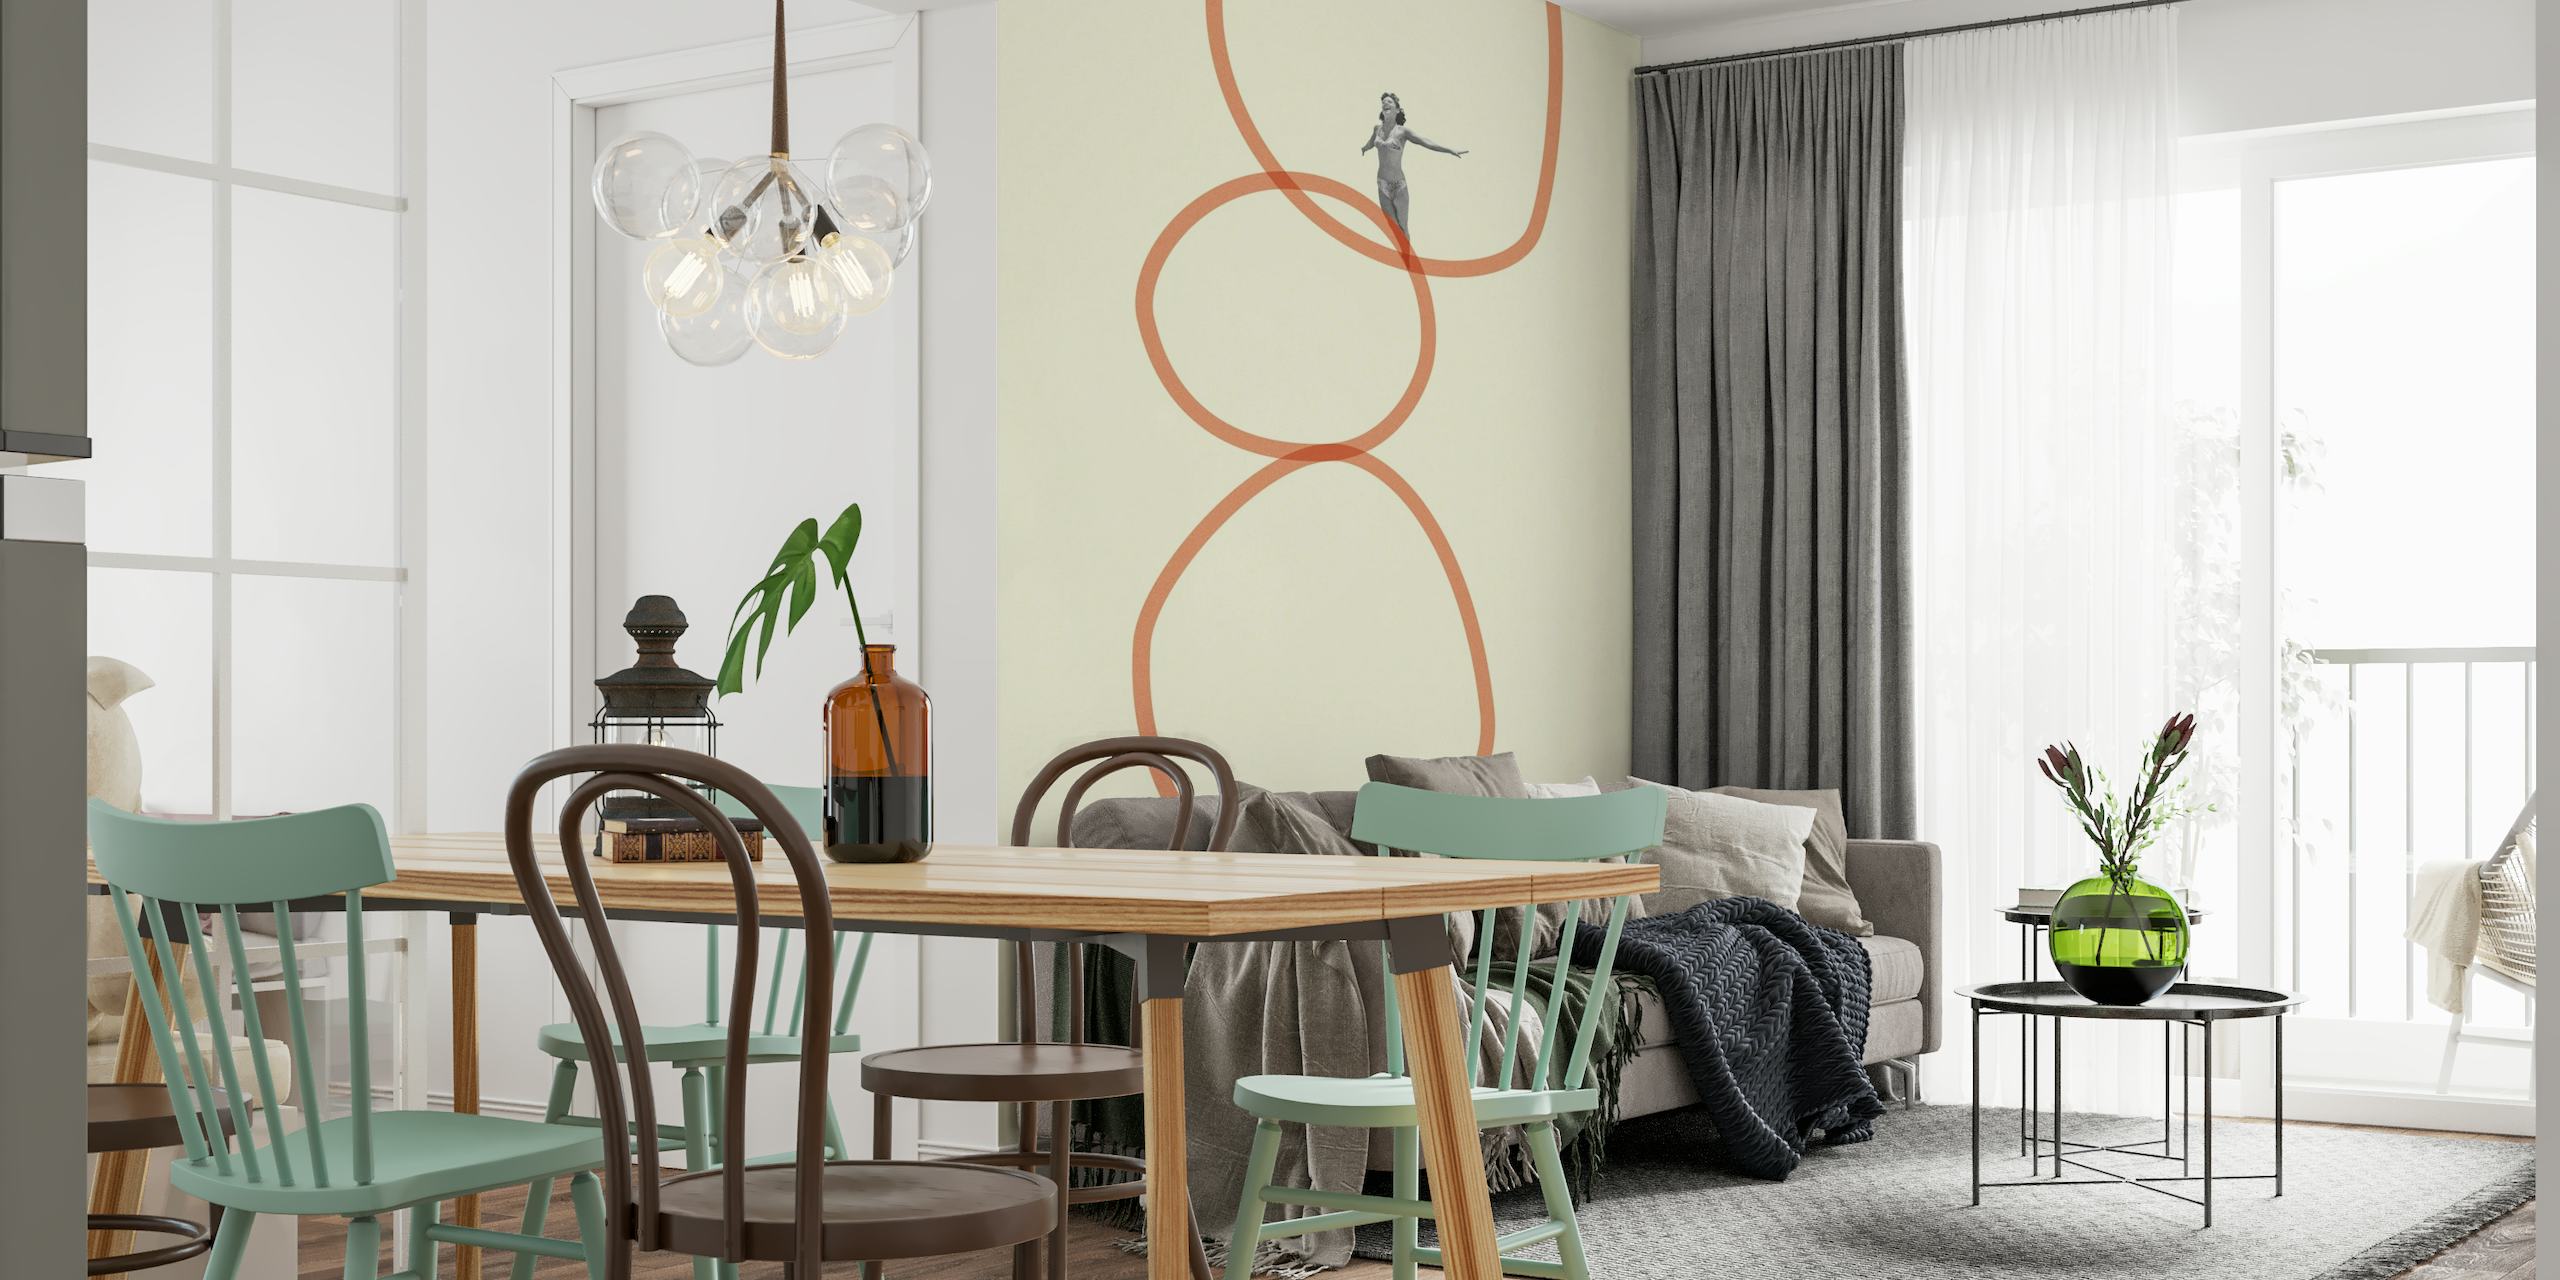 abstract silhouette wall mural with entwined loops